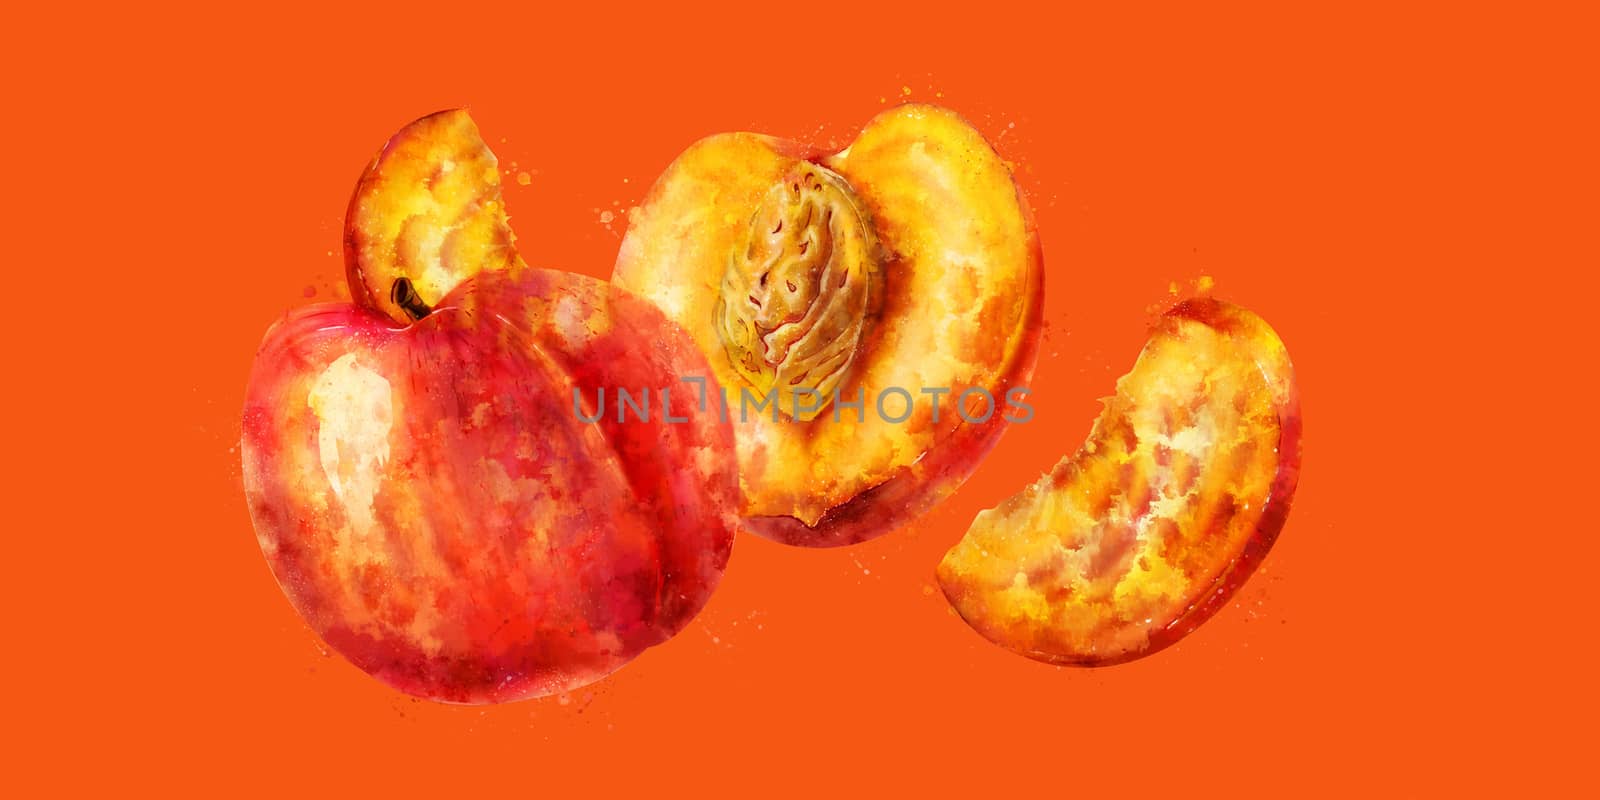 Peach on orange background. Watercolor illustration by ConceptCafe